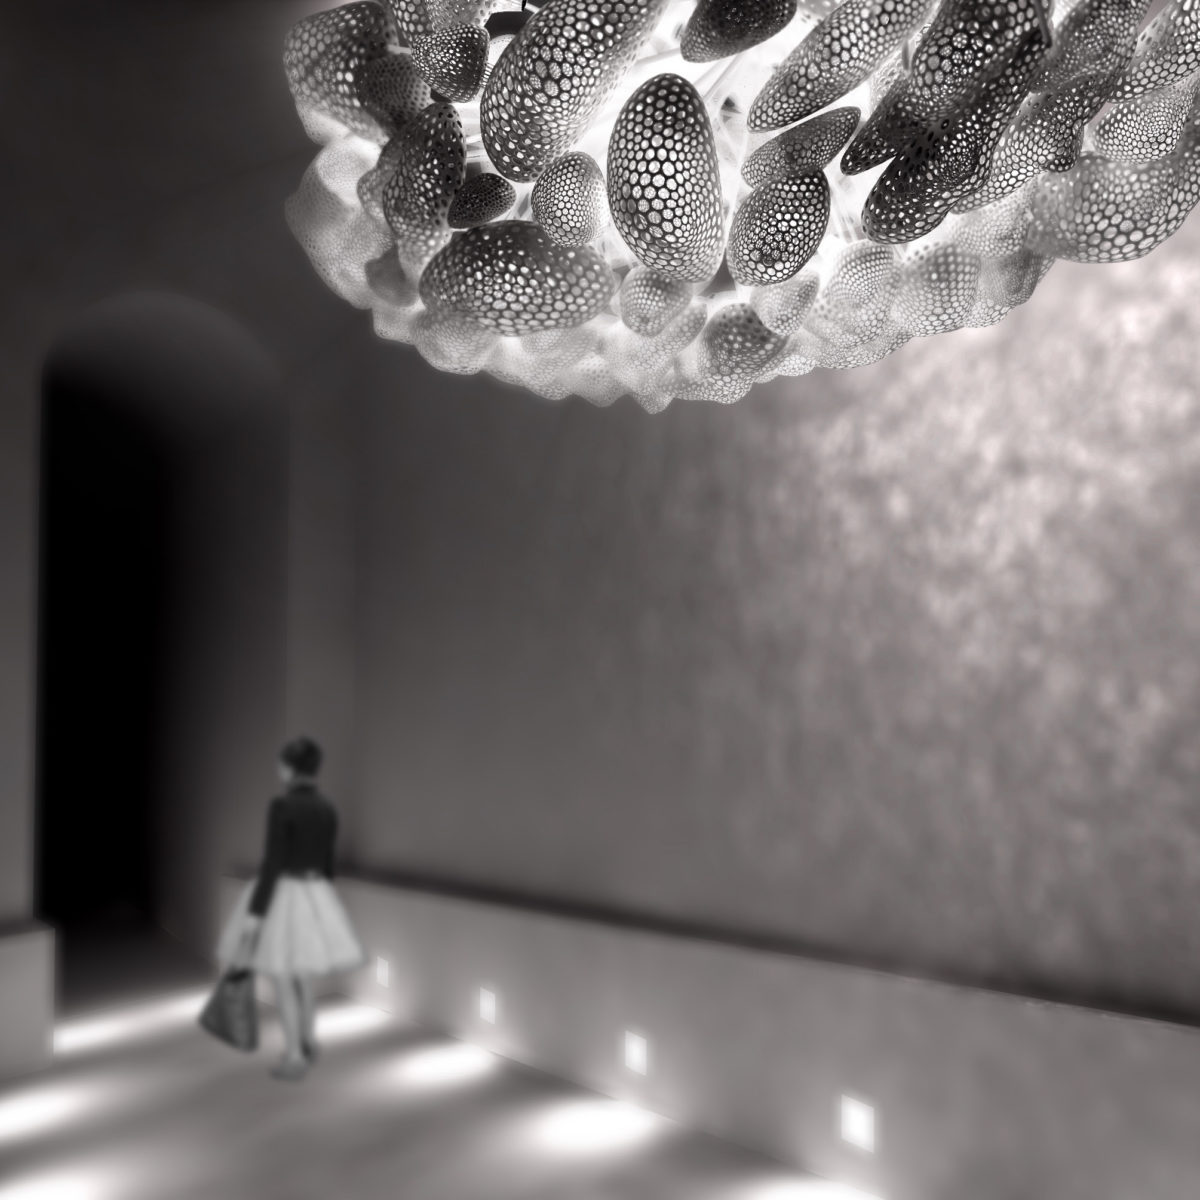 Overcast - Guan Lee, Mamou-Mani - 3D Printed Cloudlets Ceiling Installation - Night View of Installation at the V&A Museum